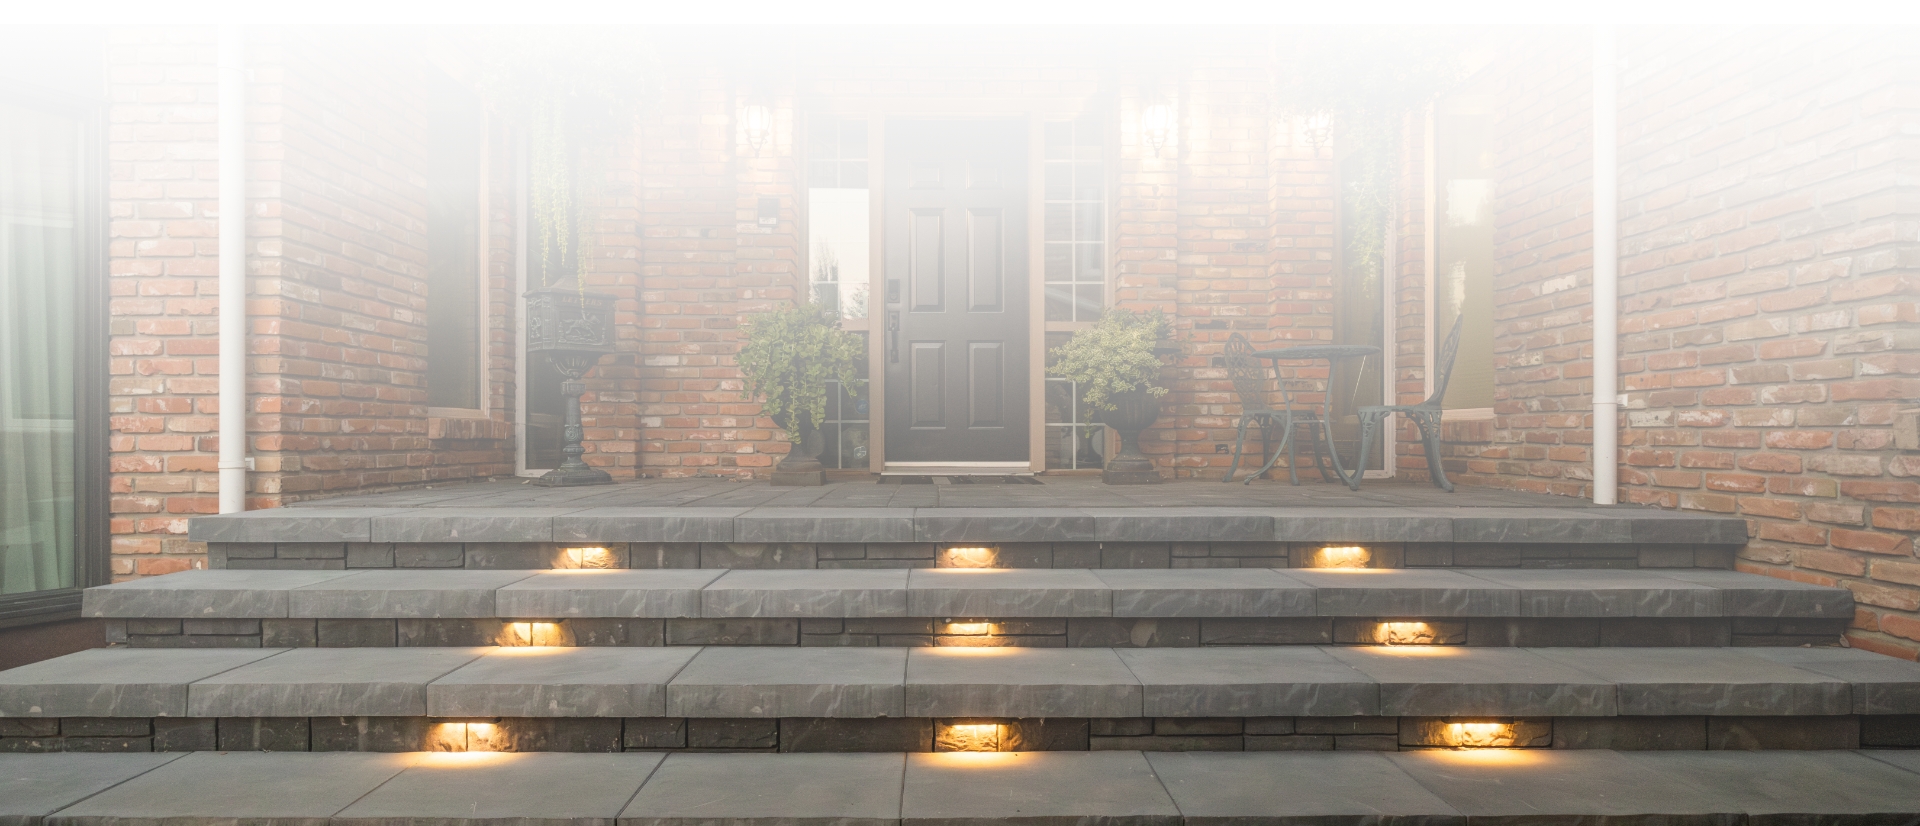 Residential home in Edmonton showcasing a hardscape design by a professional contractor, featuring illuminated stone steps leading to a dark front door, complemented by red brick walls, potted plants, and patio furniture.